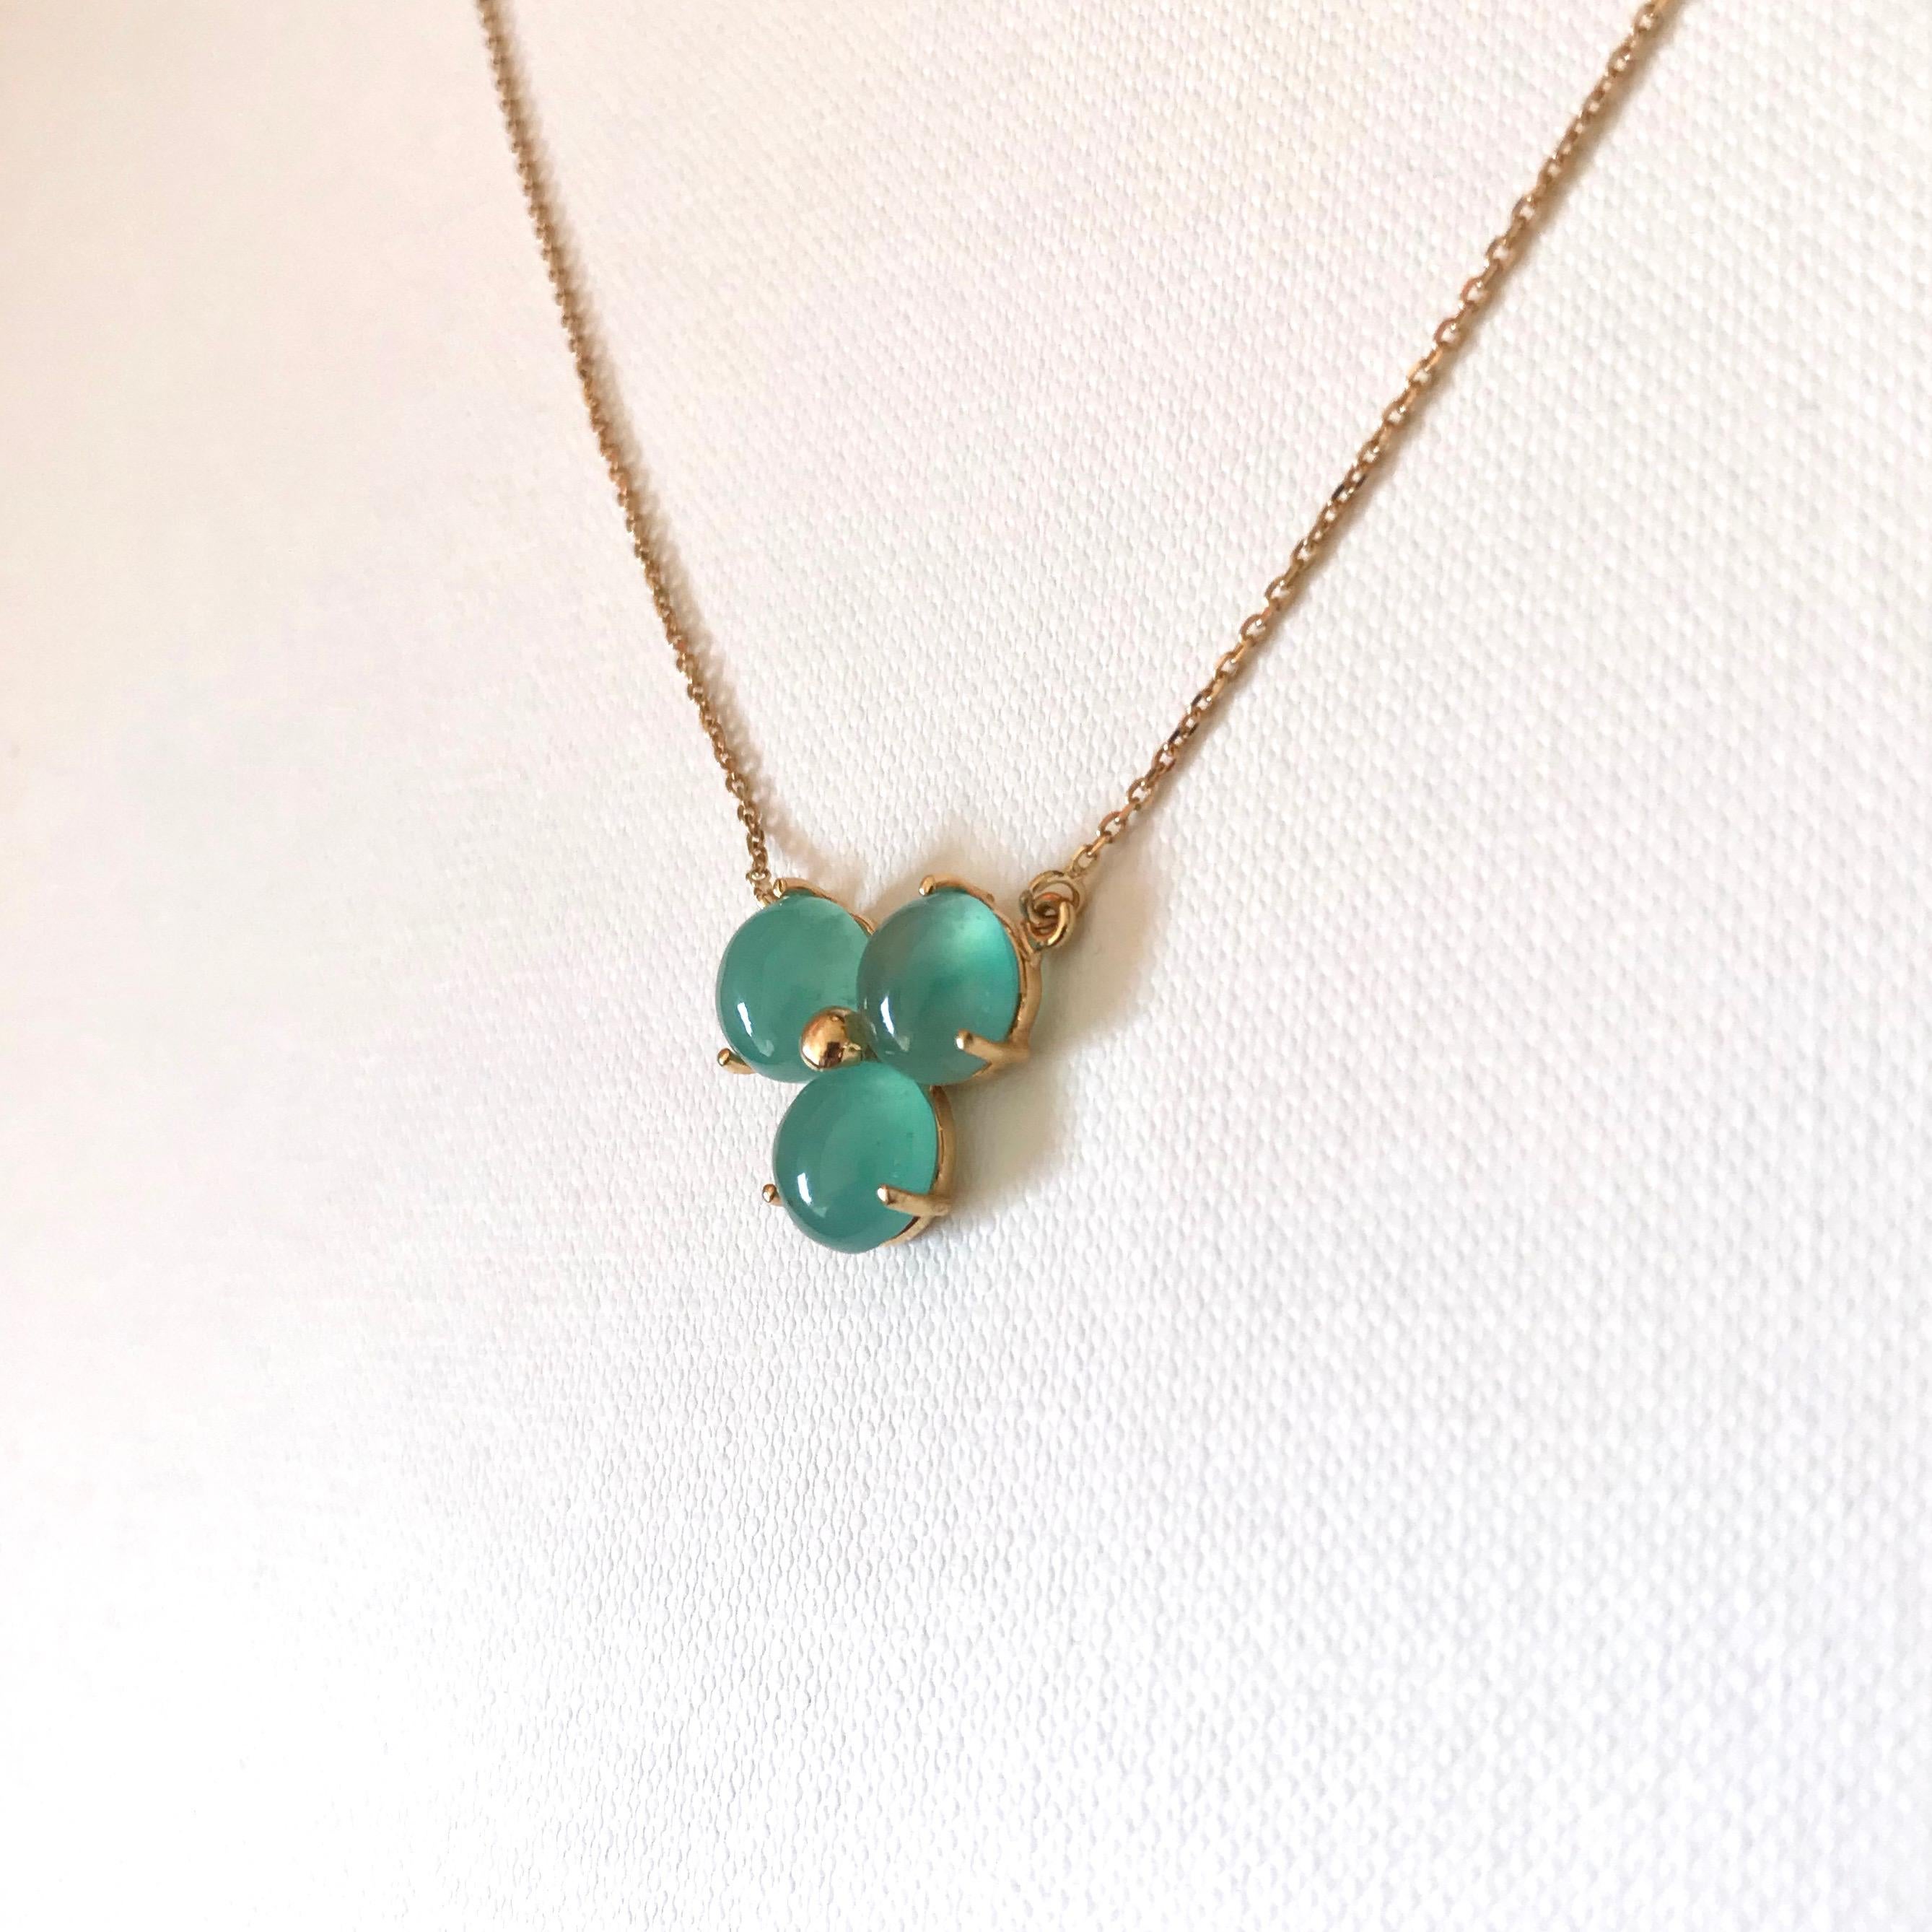 Handmade 18 karat solid yellow gold flower necklace with lovely blue-green cabochon cut Aquaprase (Chalcedony ) stones.
Flower's width: 16.00mm
Length: 40.00 – 42.00 cm ( two options )
Hallmark: London Goldsmiths’ Company –  Assay Office
All our